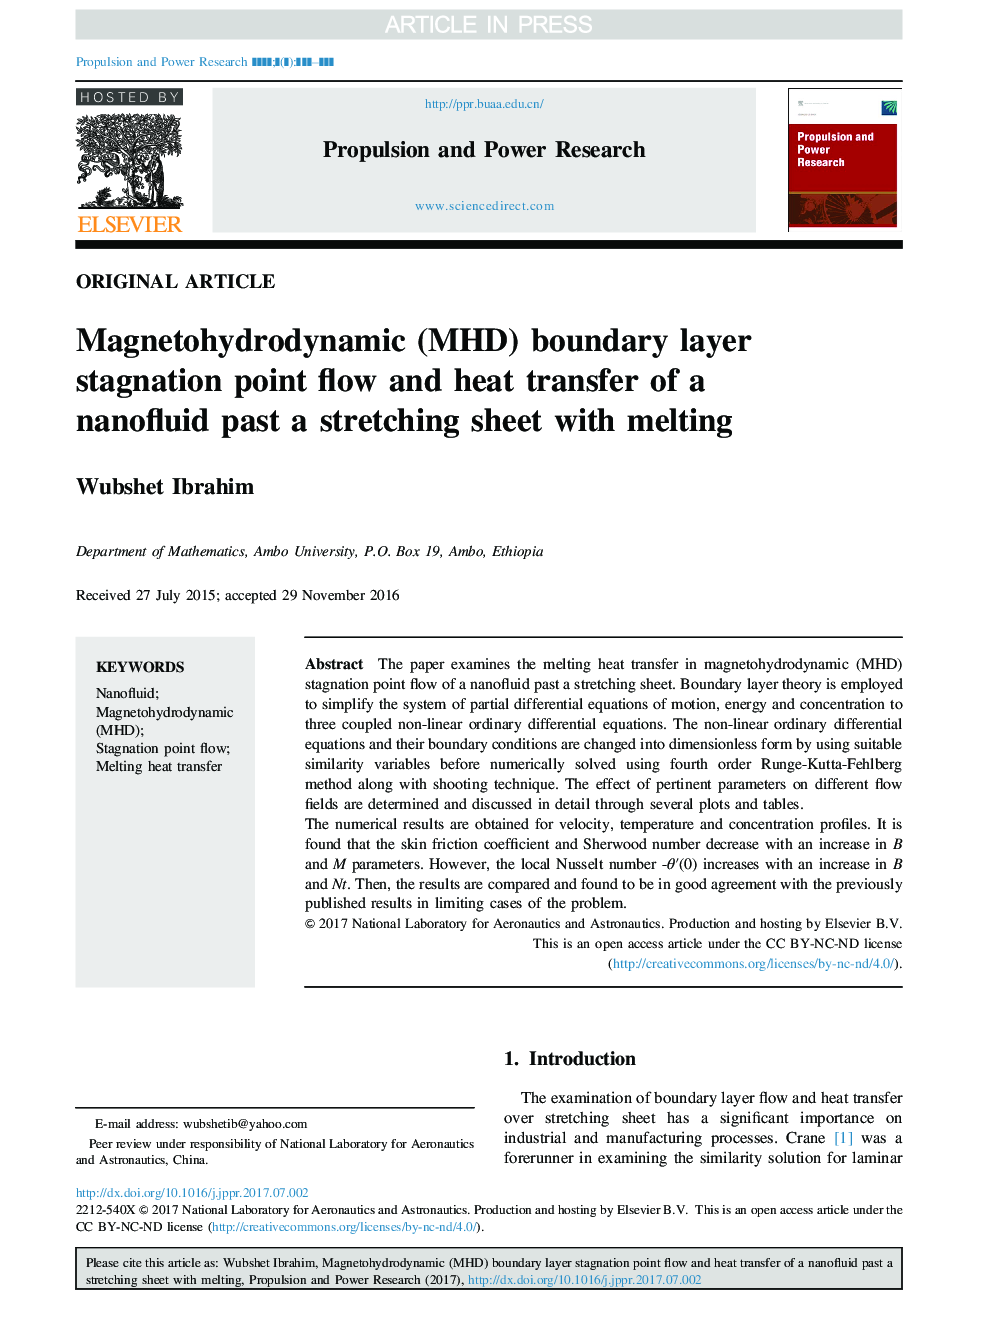 Magnetohydrodynamic (MHD) boundary layer stagnation point flow and heat transfer of a nanofluid past a stretching sheet with melting